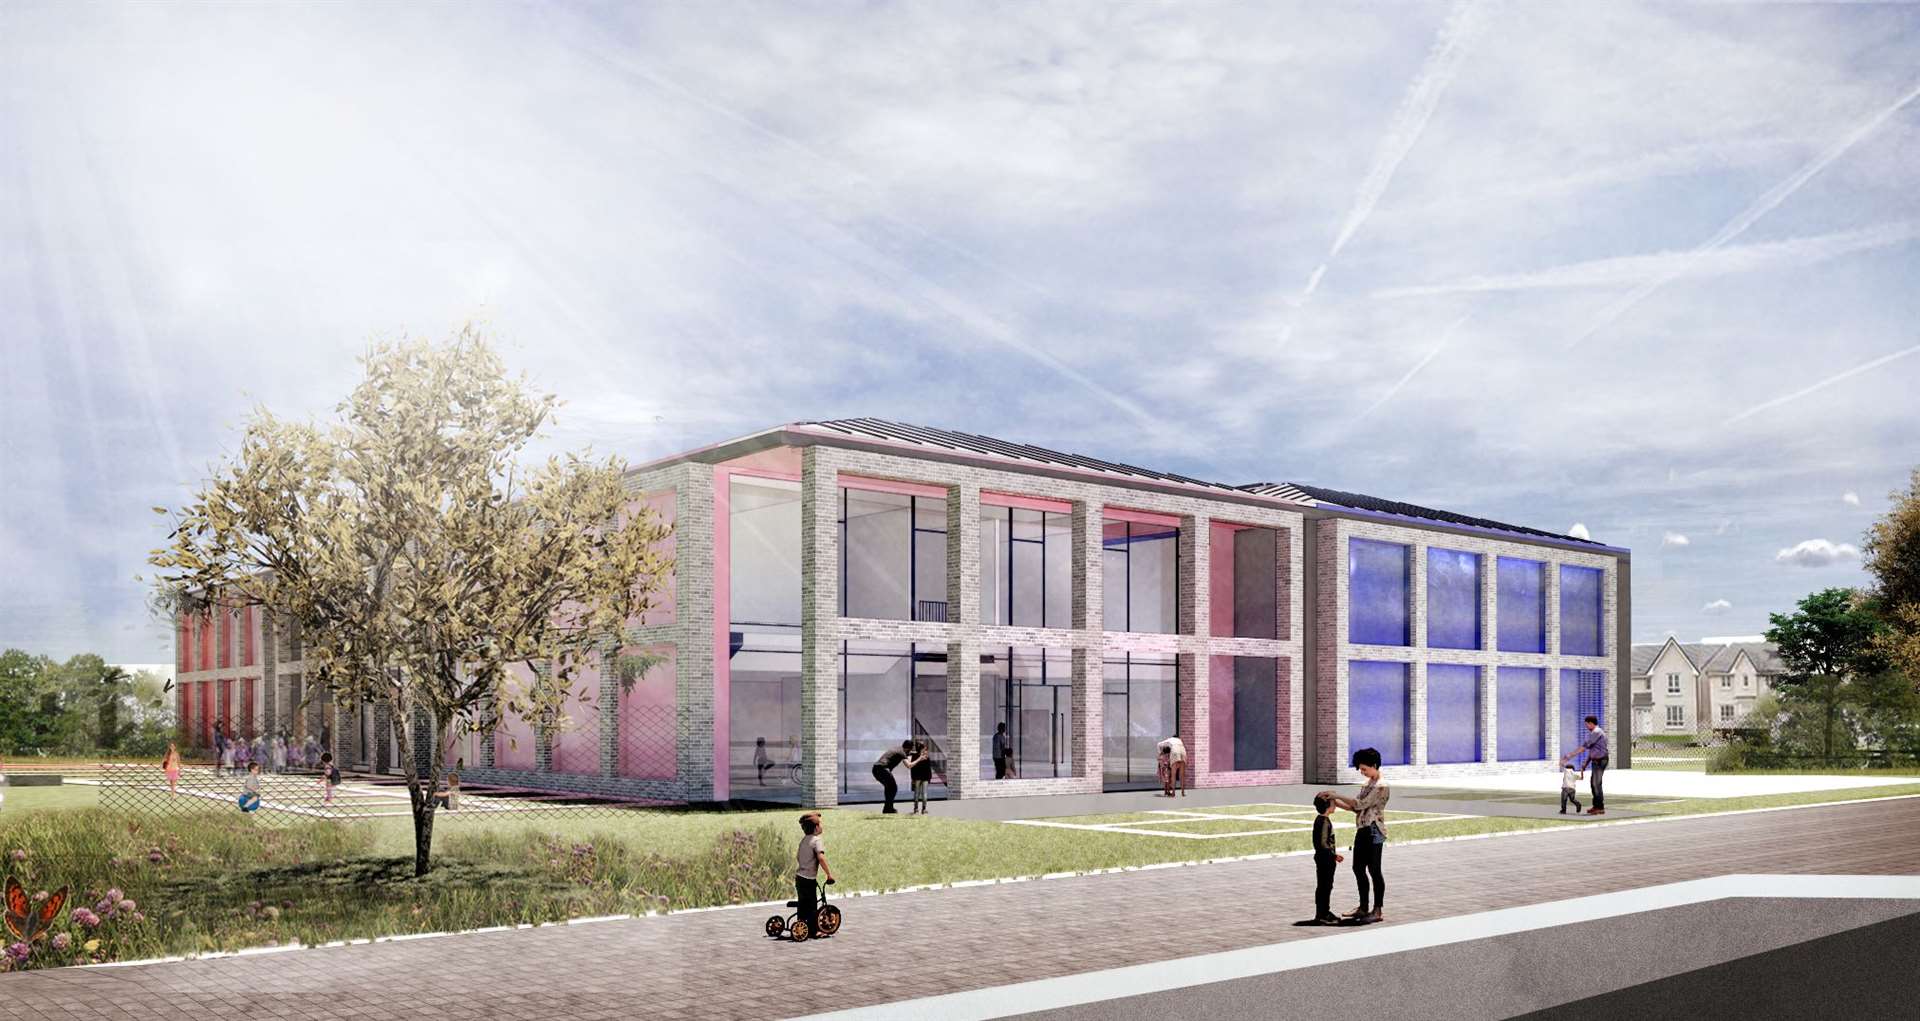 Artist's impression of the Ness Castle primary school. ©Stallan-Brand Architects.